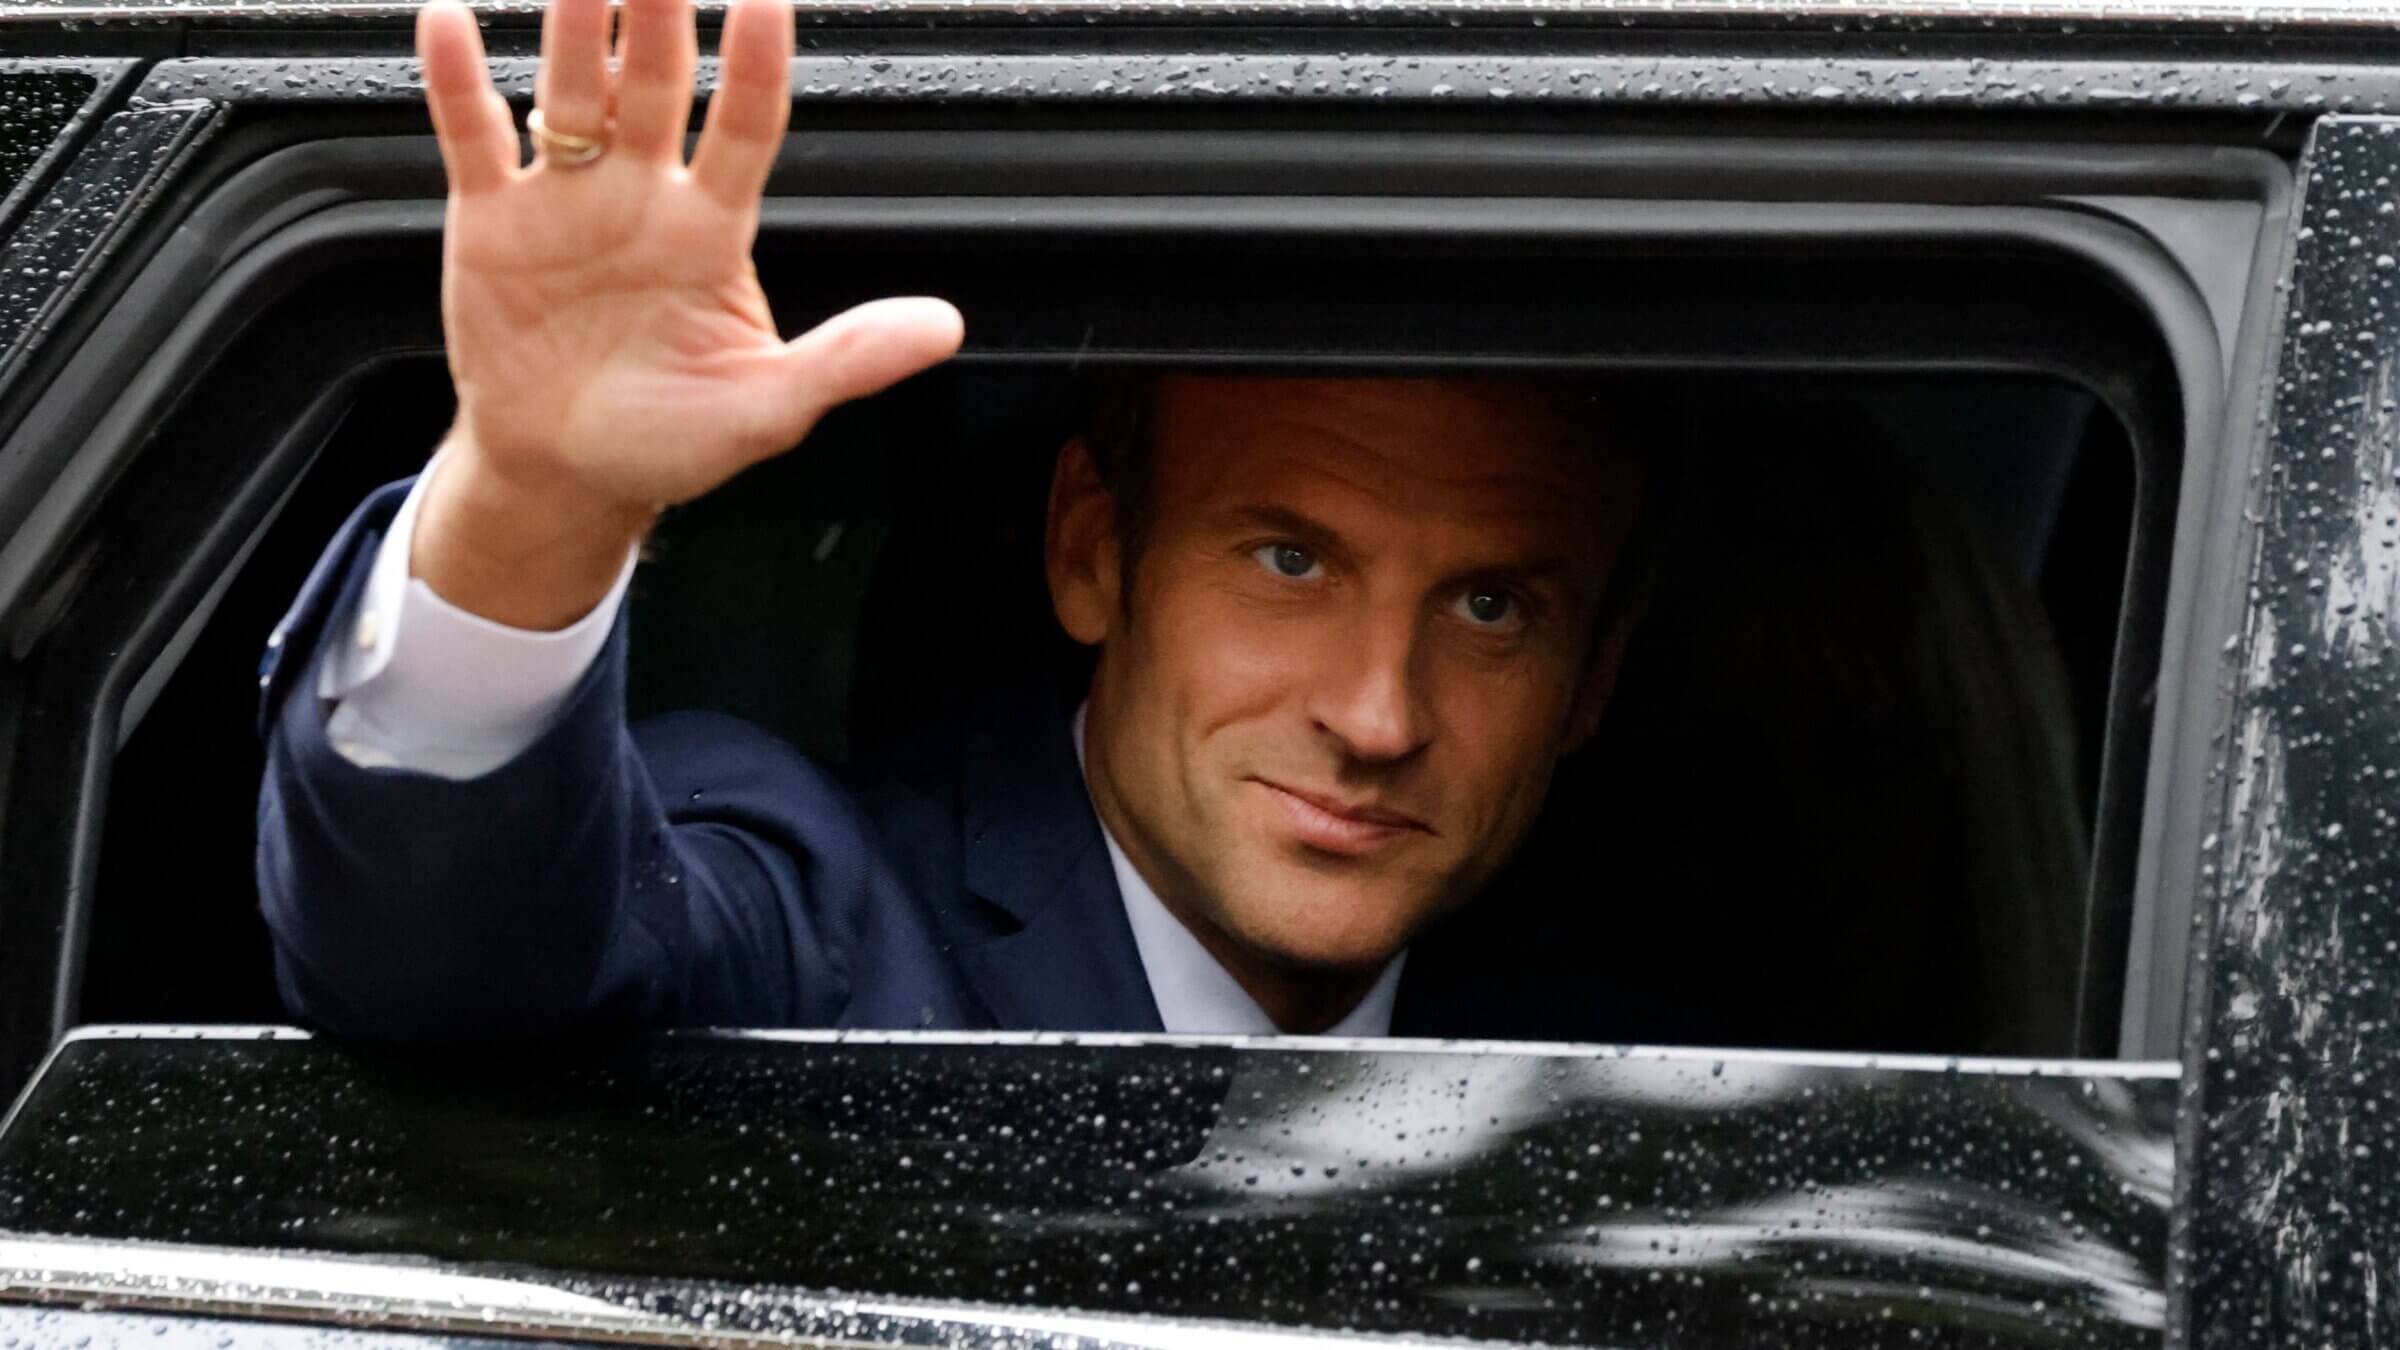 France’s President Emmanuel Macron waves as he leaves after casting his vote in the second stage of French parliamentary elections on June 19, 2022.